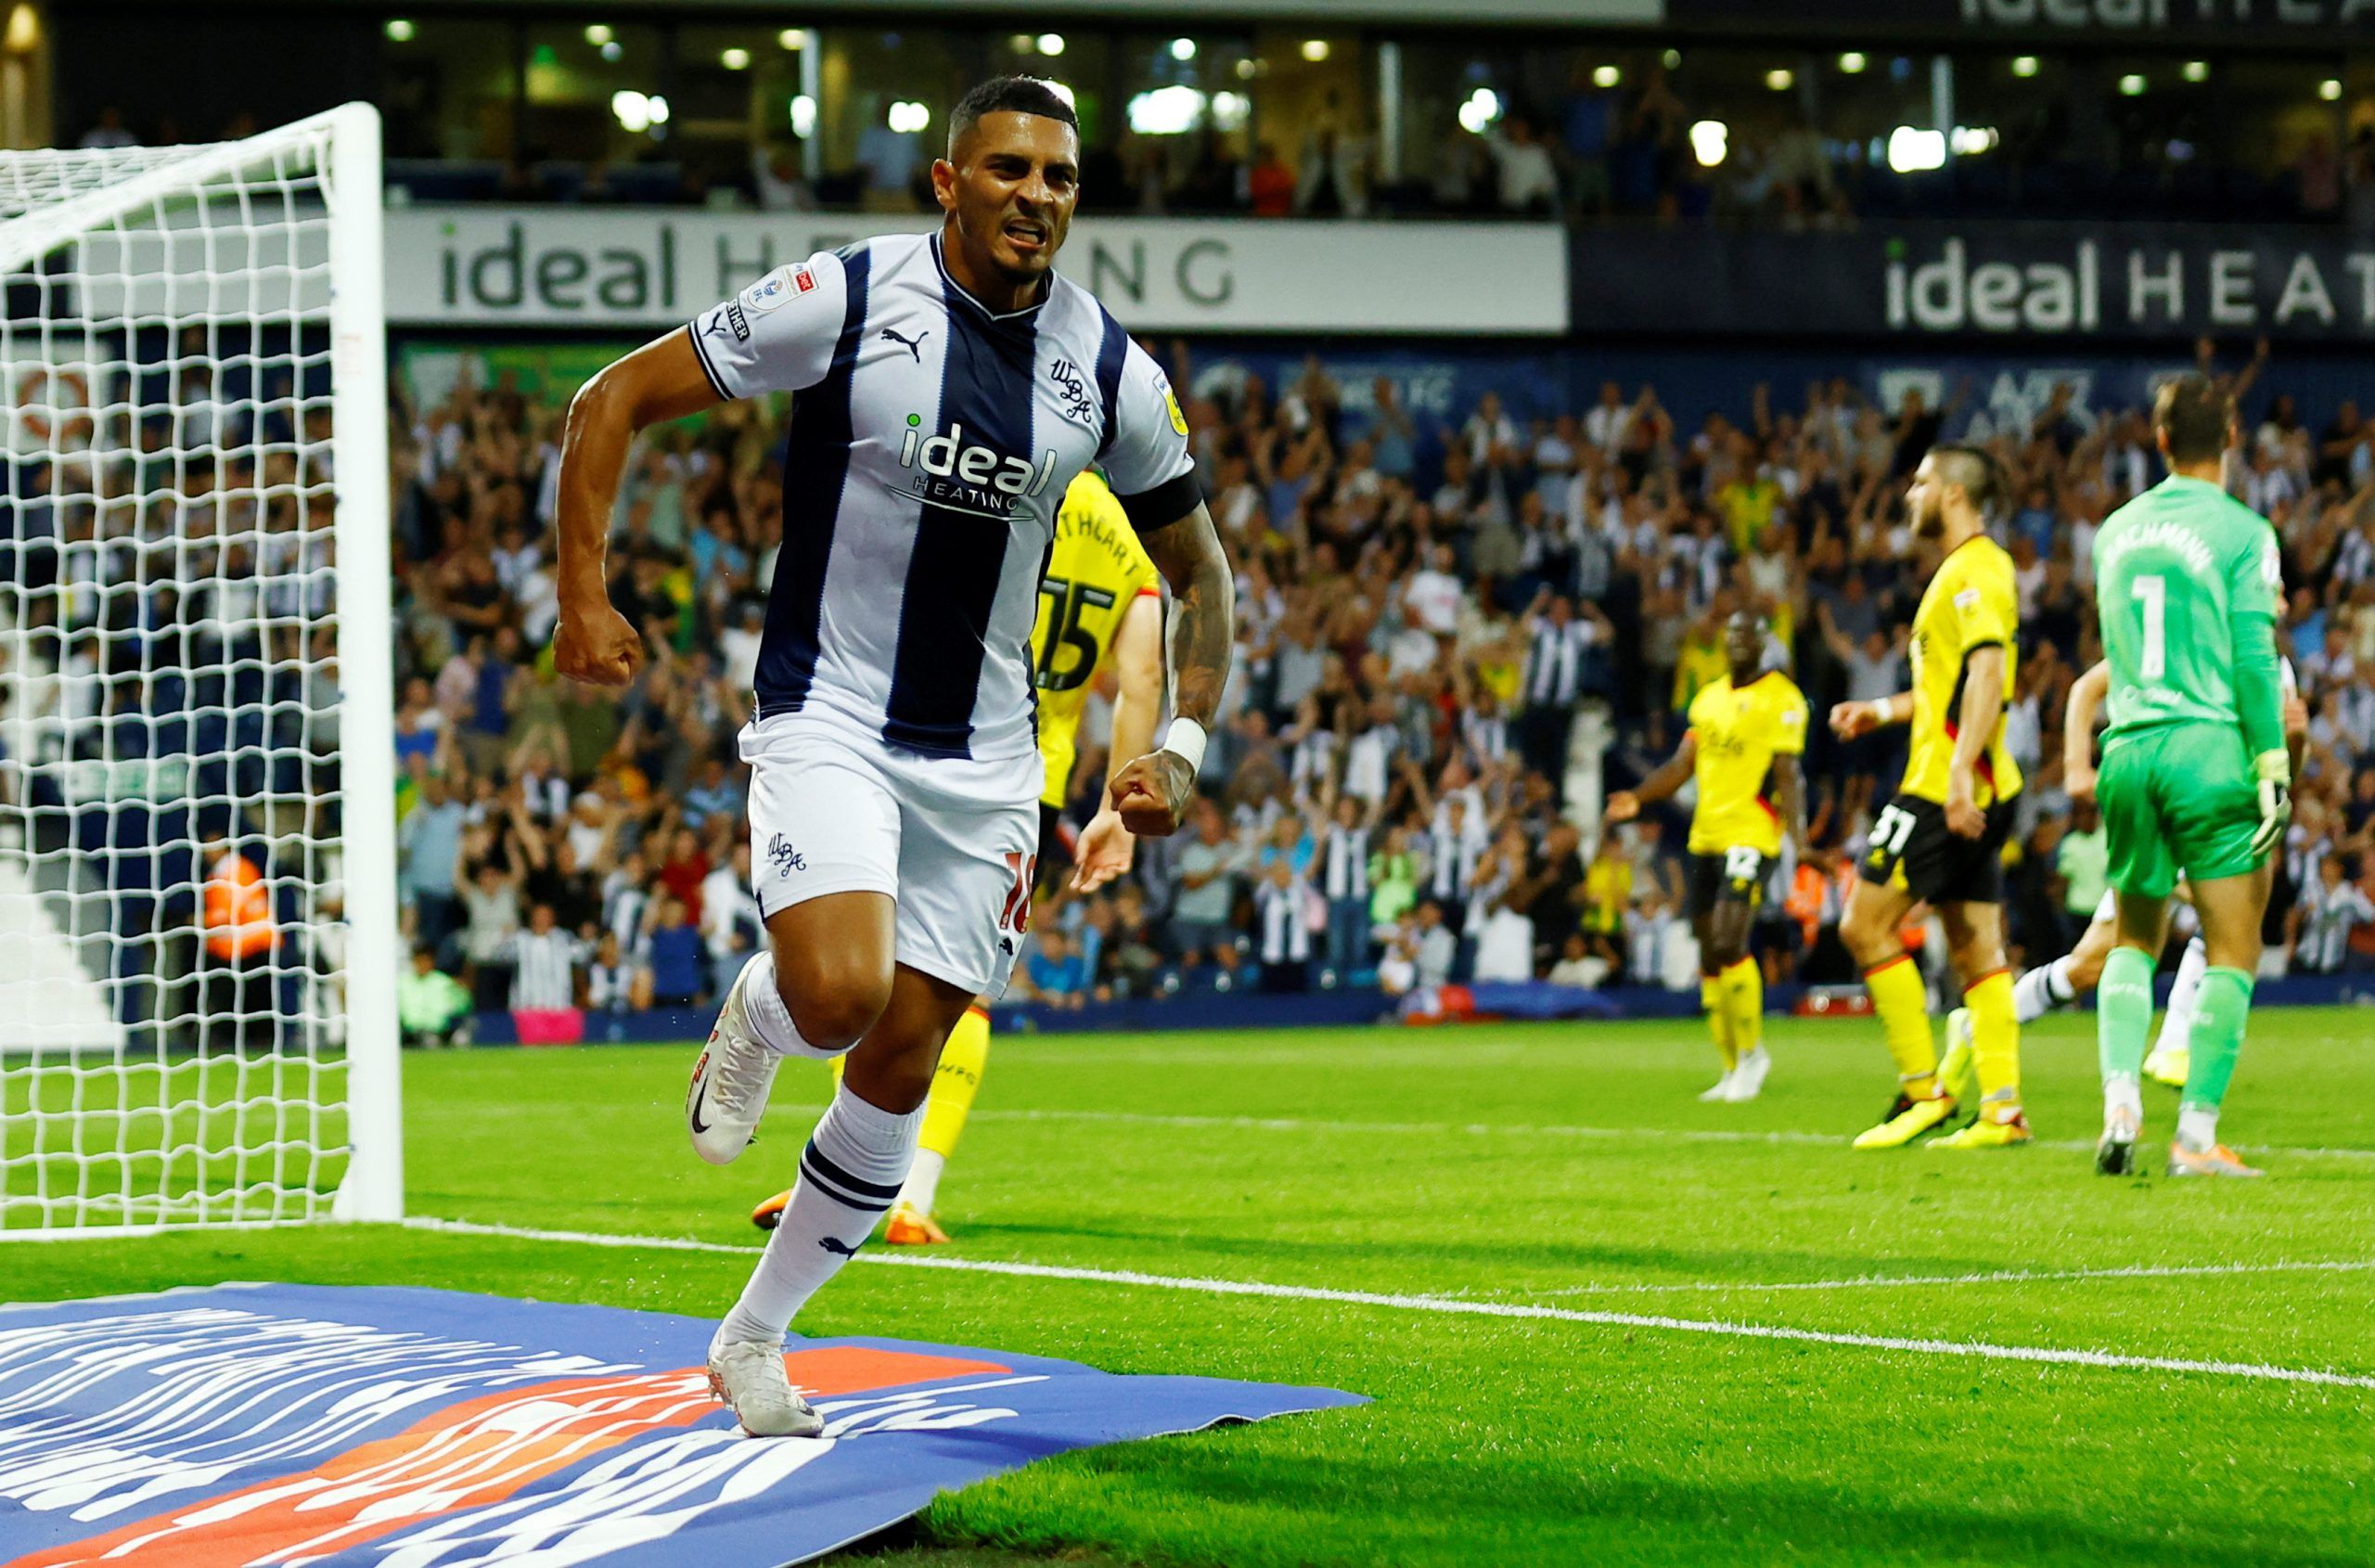 Soccer Football - Championship - West Bromwich Albion v Watford - The Hawthorns, West Bromwich, Britain - August 8, 2022  West Bromwich Albion's Karlan Grant celebrates scoring their first goal  Action Images/Andrew Boyers  EDITORIAL USE ONLY. No use with unauthorized audio, video, data, fixture lists, club/league logos or 